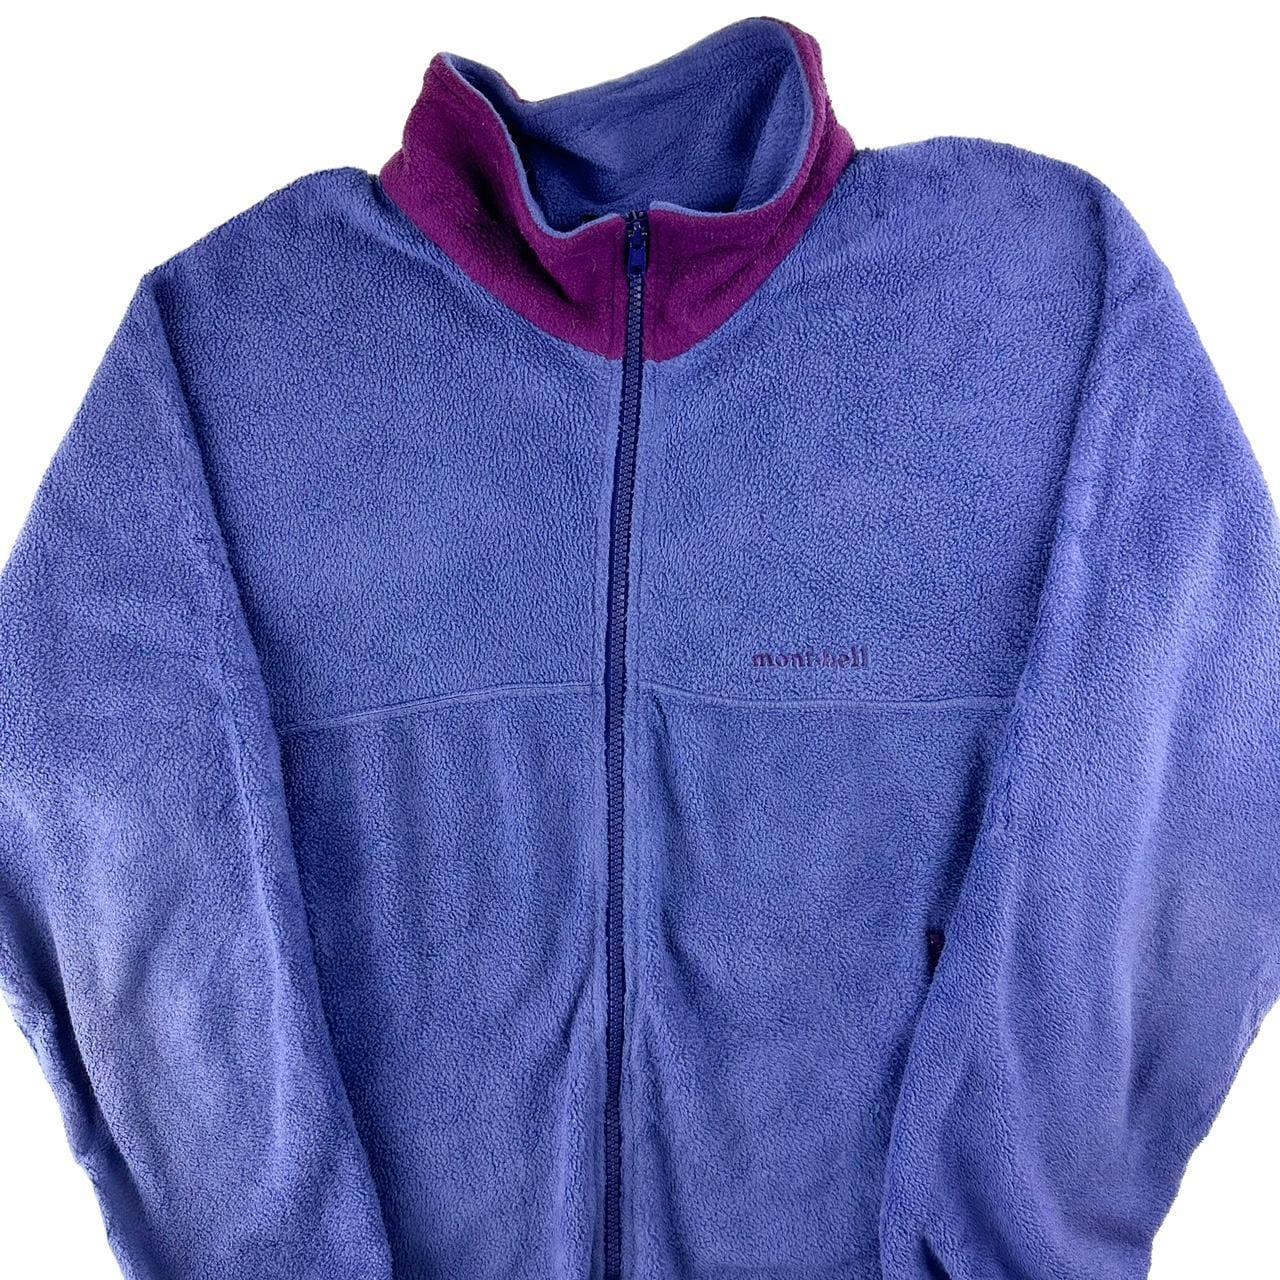 Vintage Montbell zip fleece size S - Known Source